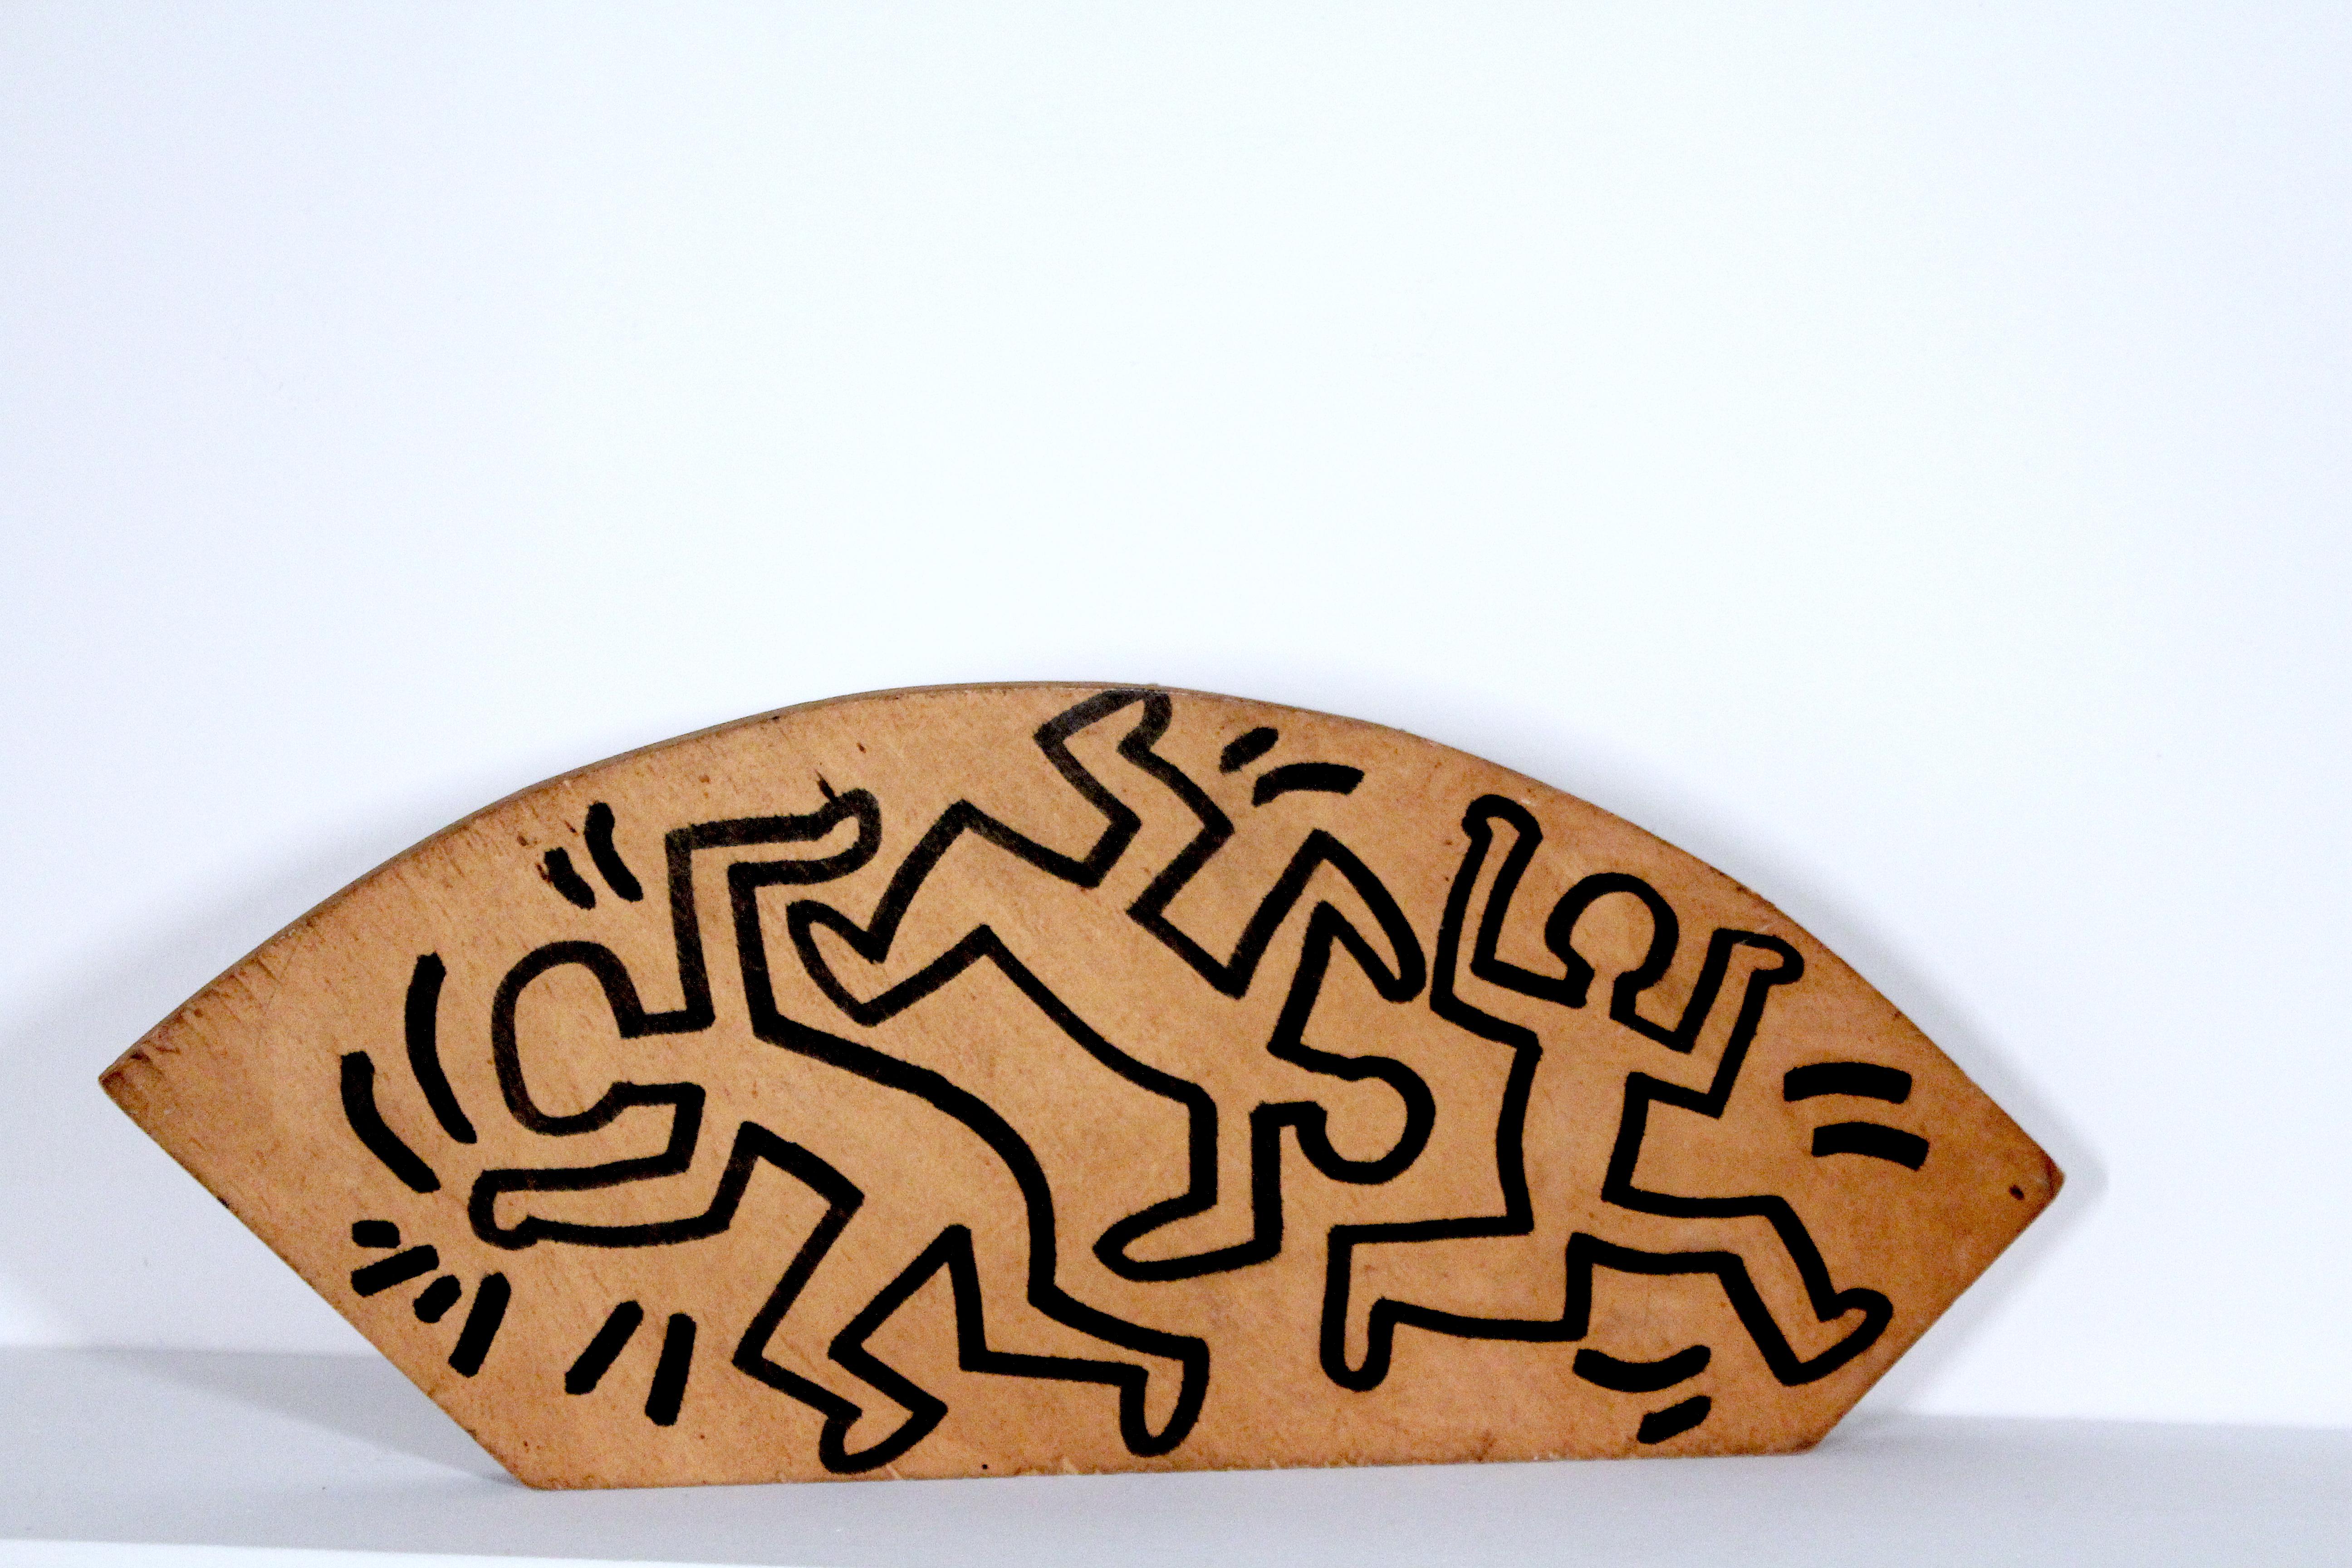 Untitled - Art by Keith Haring